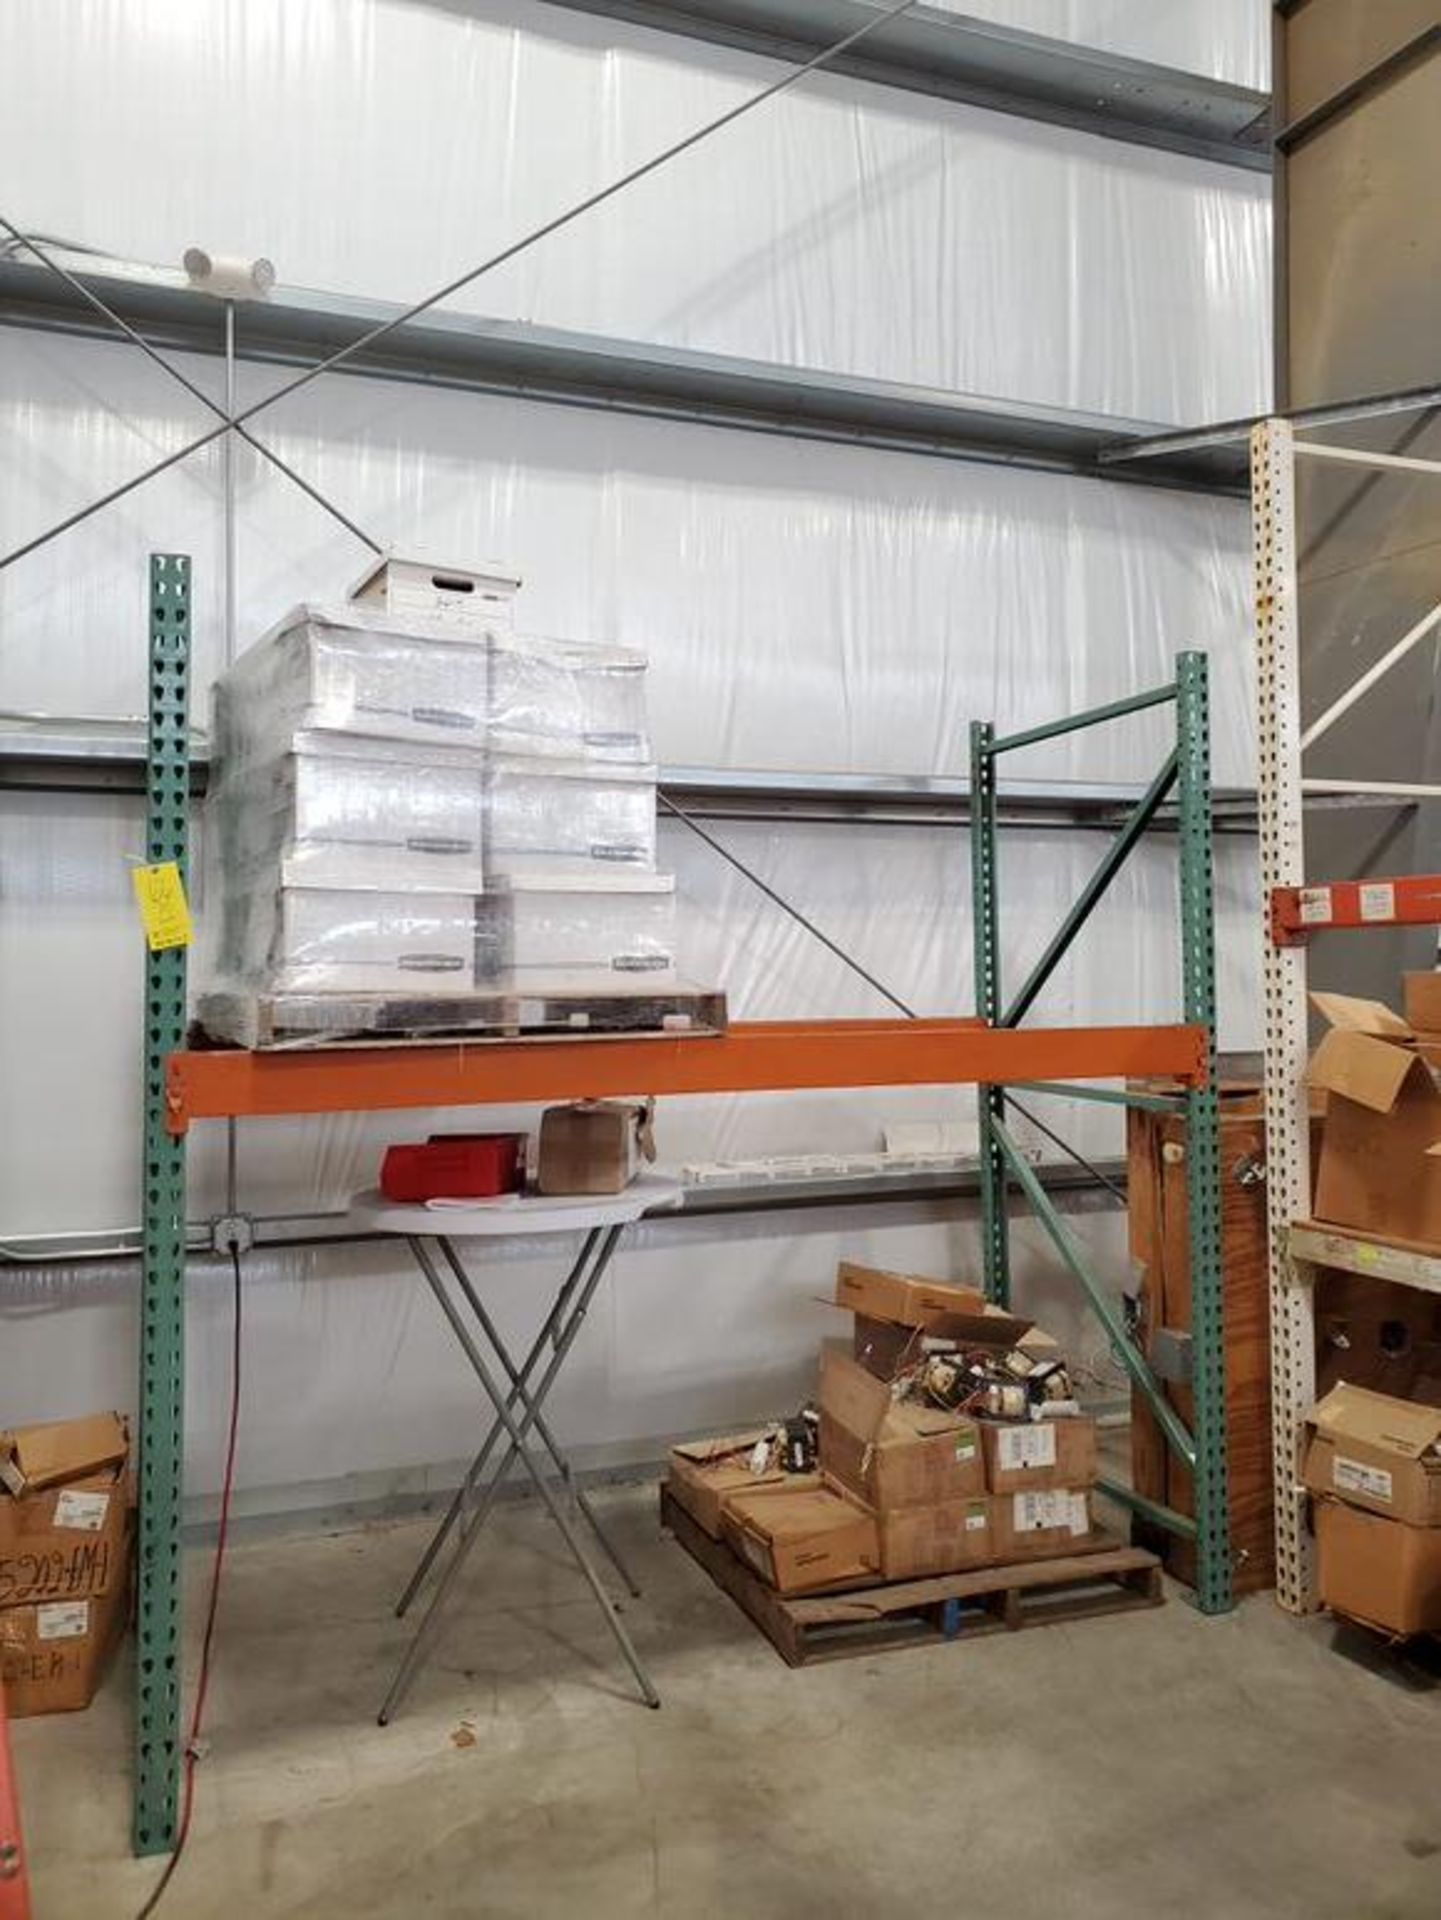 4 Sections Of Pallet Racks (4) 10'x42" Uprights; (4) 9' Crossbeams (Contents Excluded) - Image 6 of 8